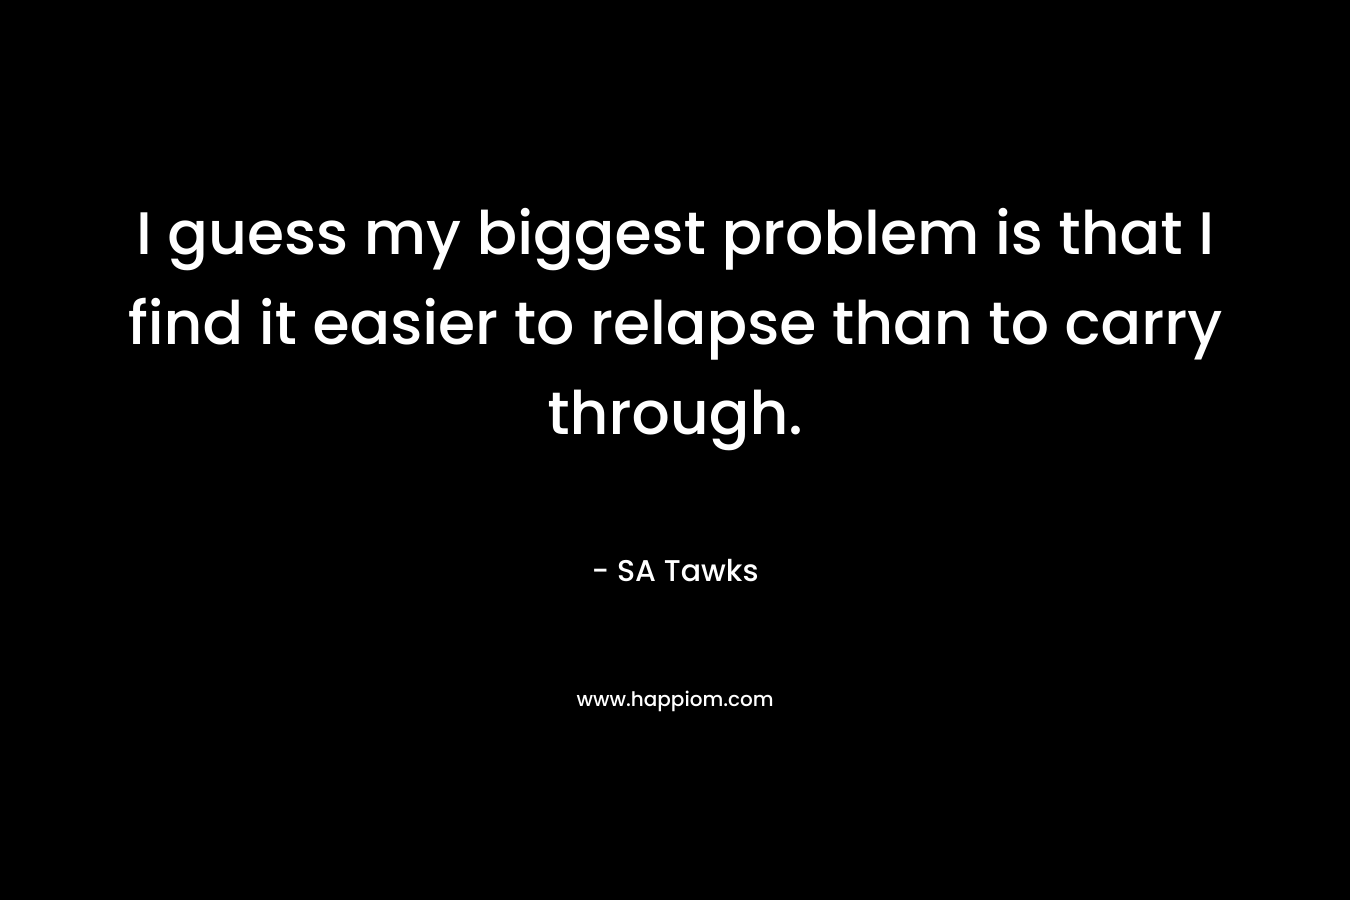 I guess my biggest problem is that I find it easier to relapse than to carry through. – SA Tawks